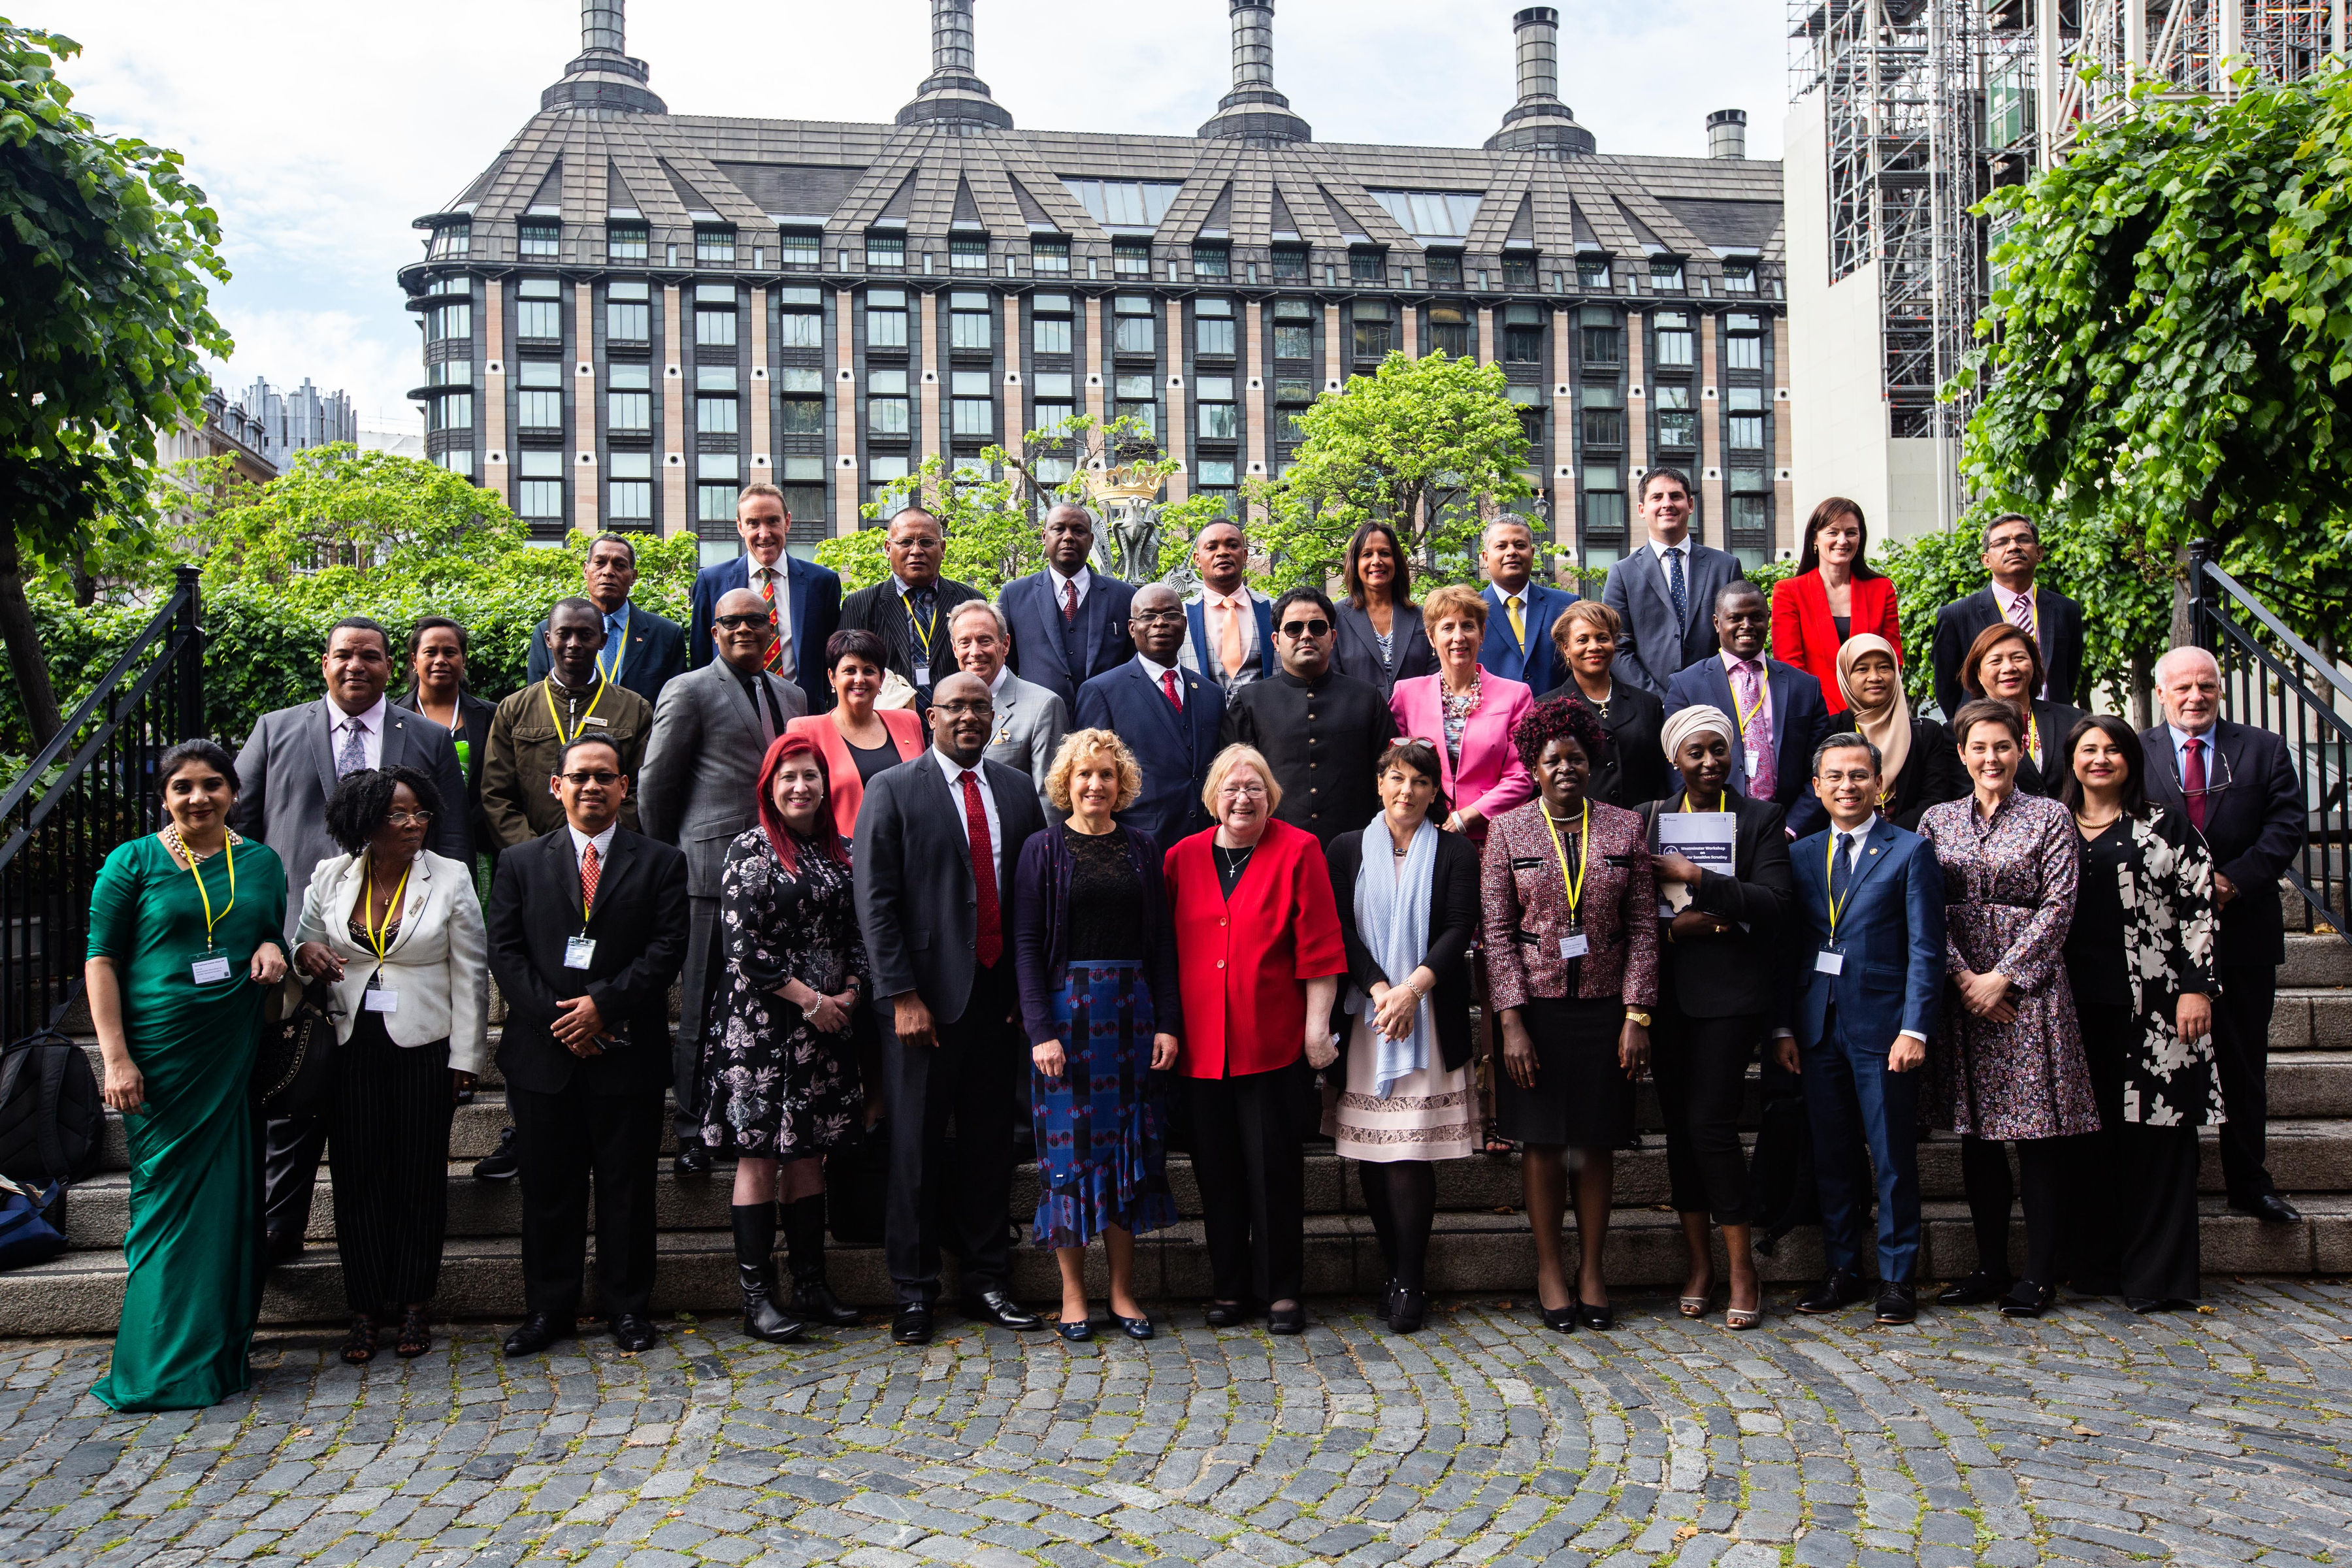 Workshop delegates from 25 legislatures from all regions of the Commonwealth